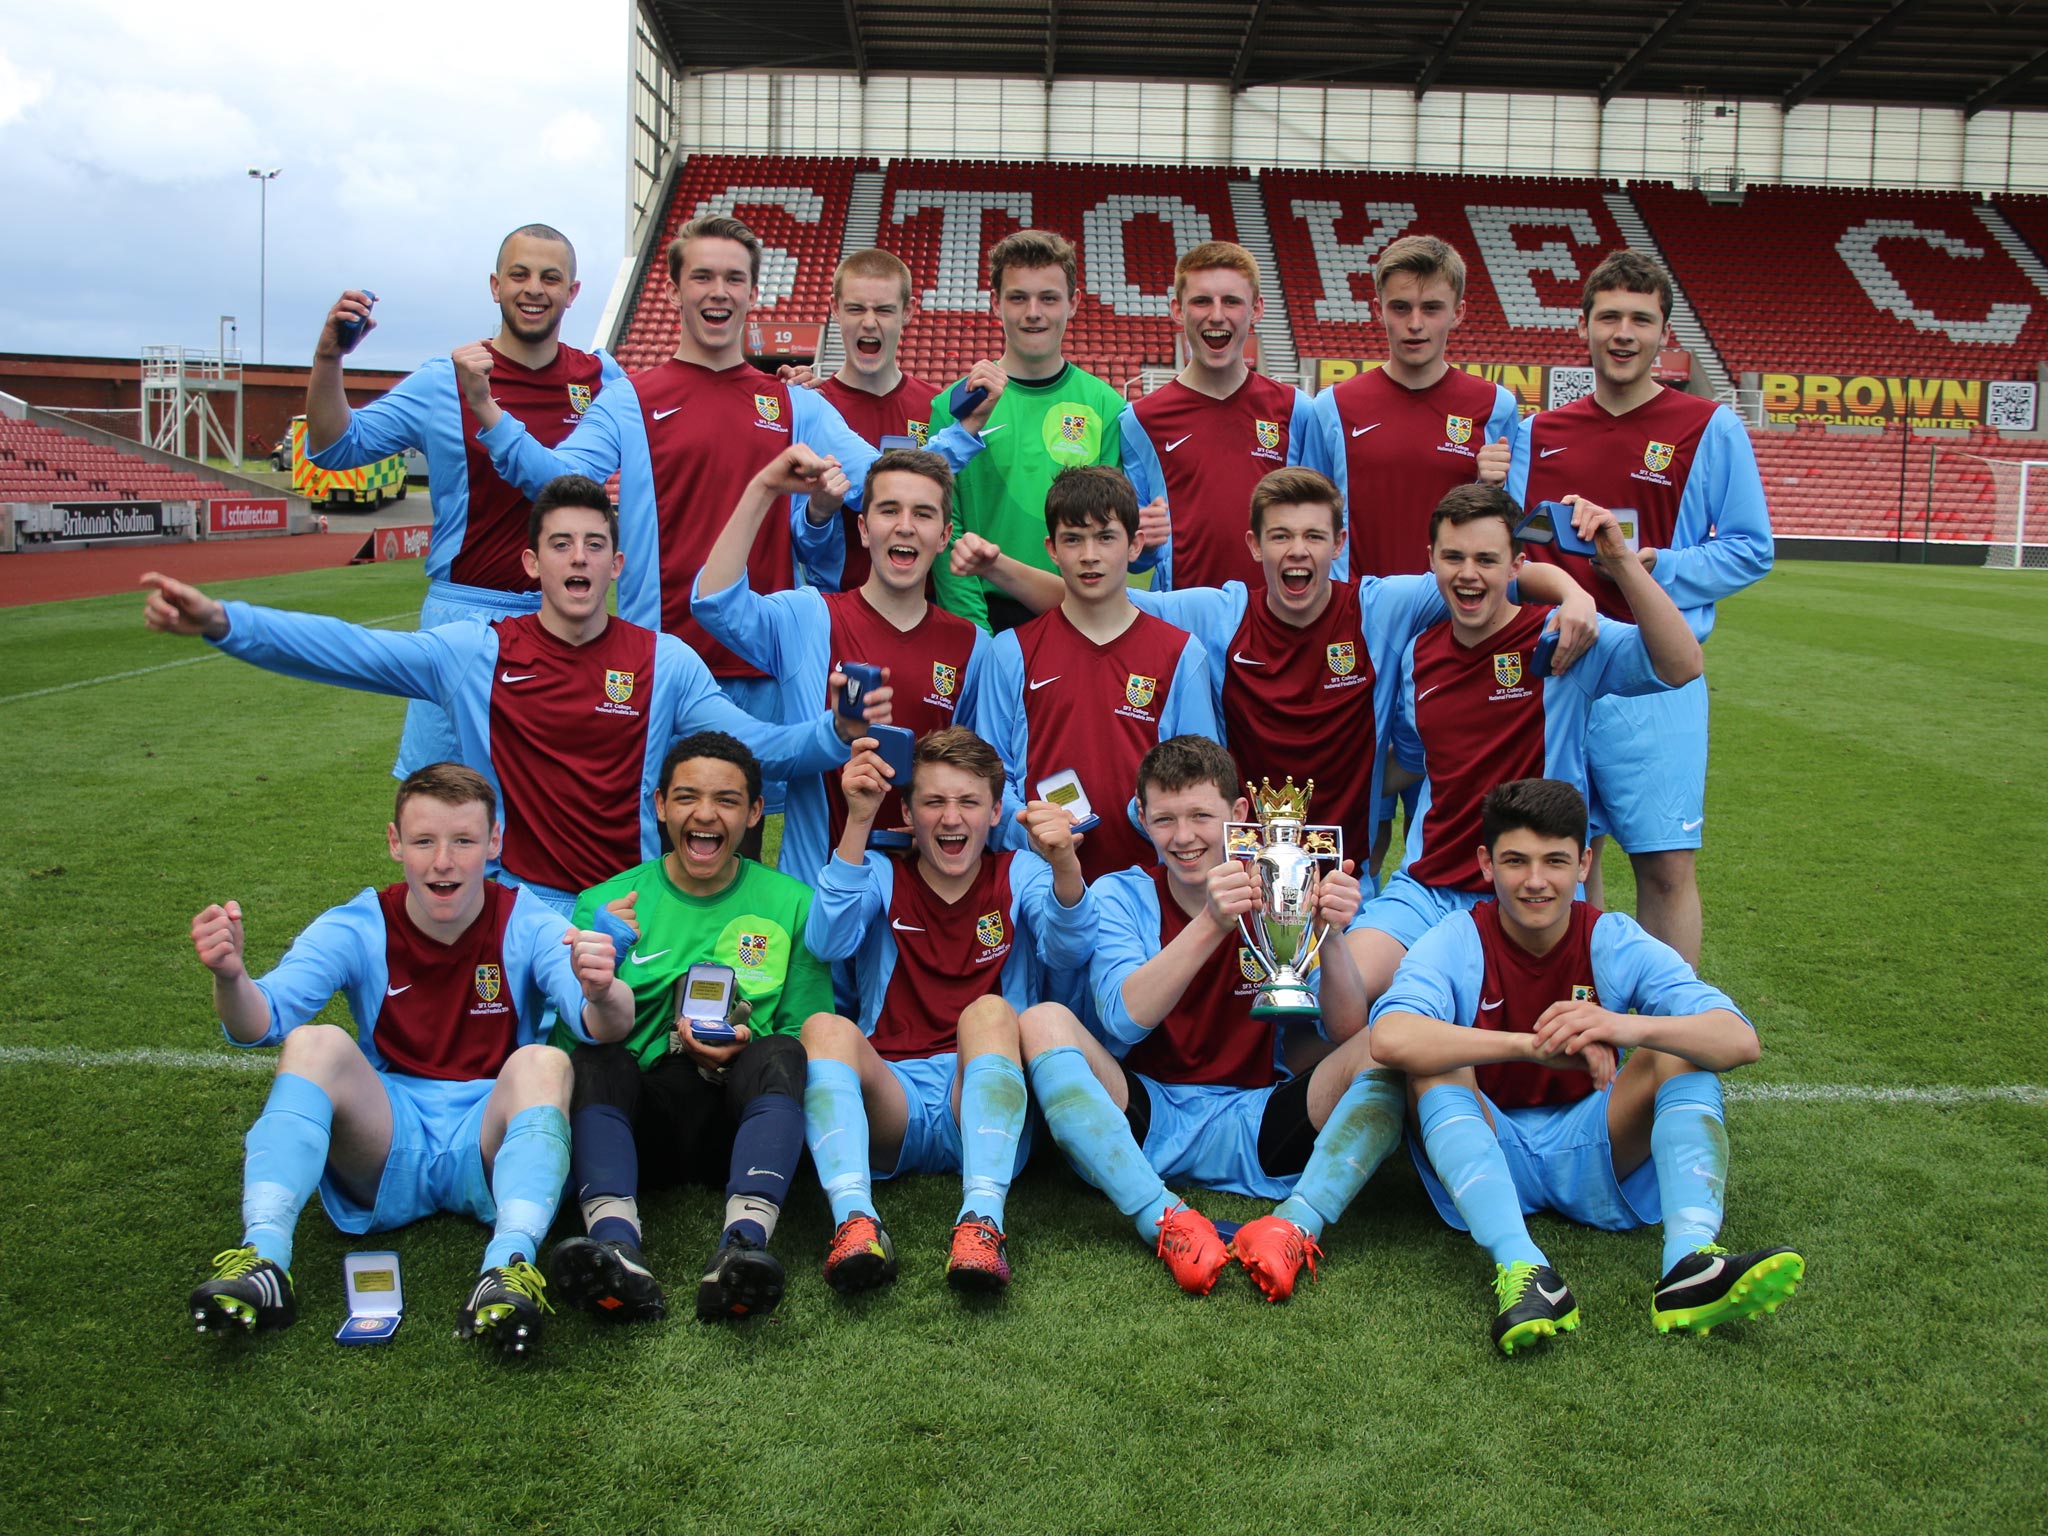 St Francis Xavier’s – wearing kit provided by Liverpool’s Jon Flanagan – celebrate their dramatic
victory on penalties in the final of the Premier League
Schools Cup this week